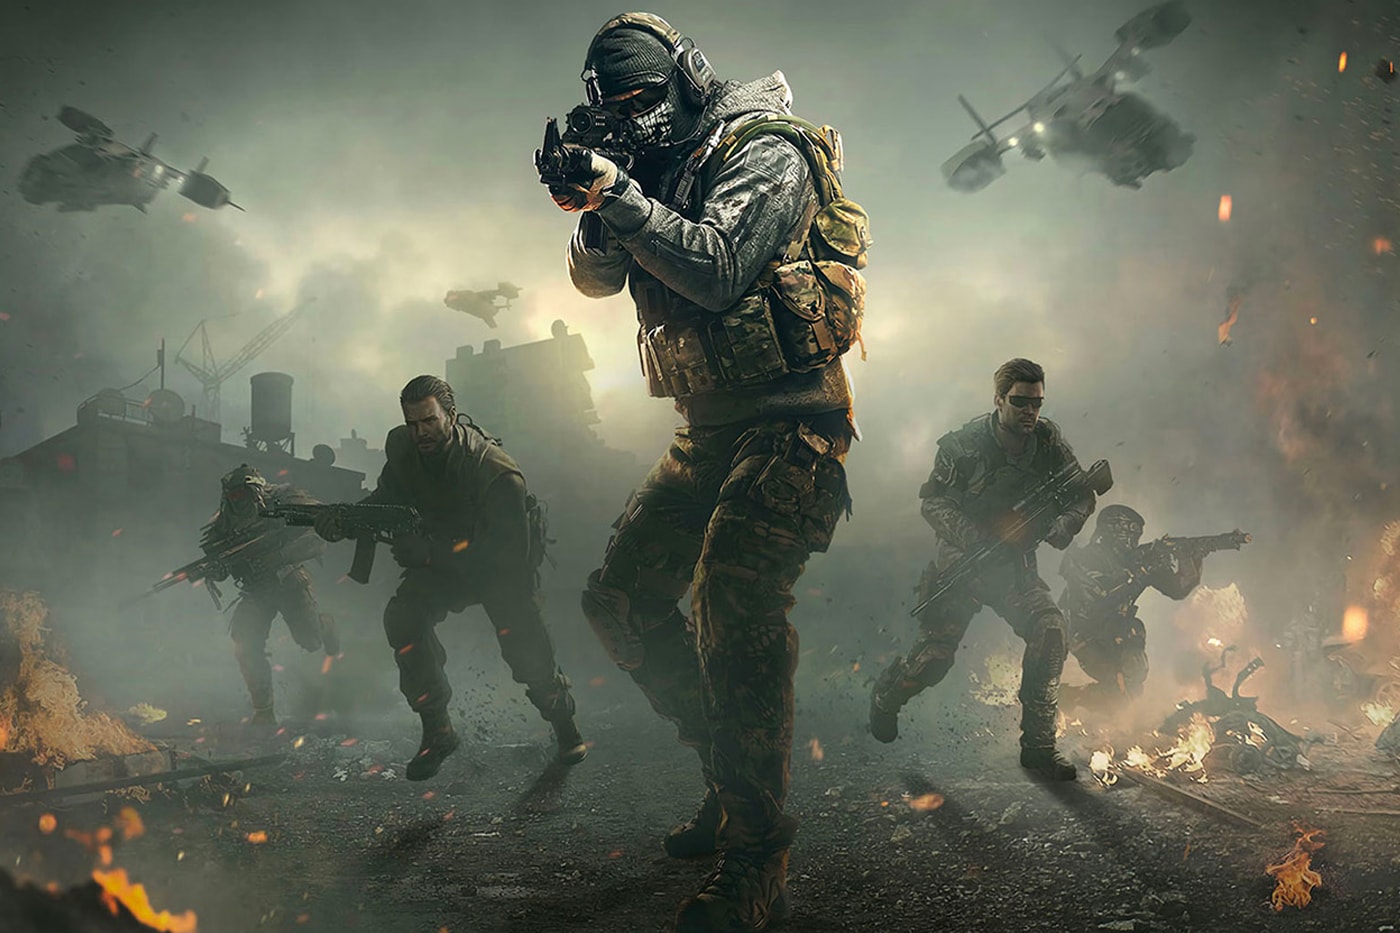 Microsoft Sony 10 Years Call Of Duty Rumor Activision Blizzard Acquisition Info